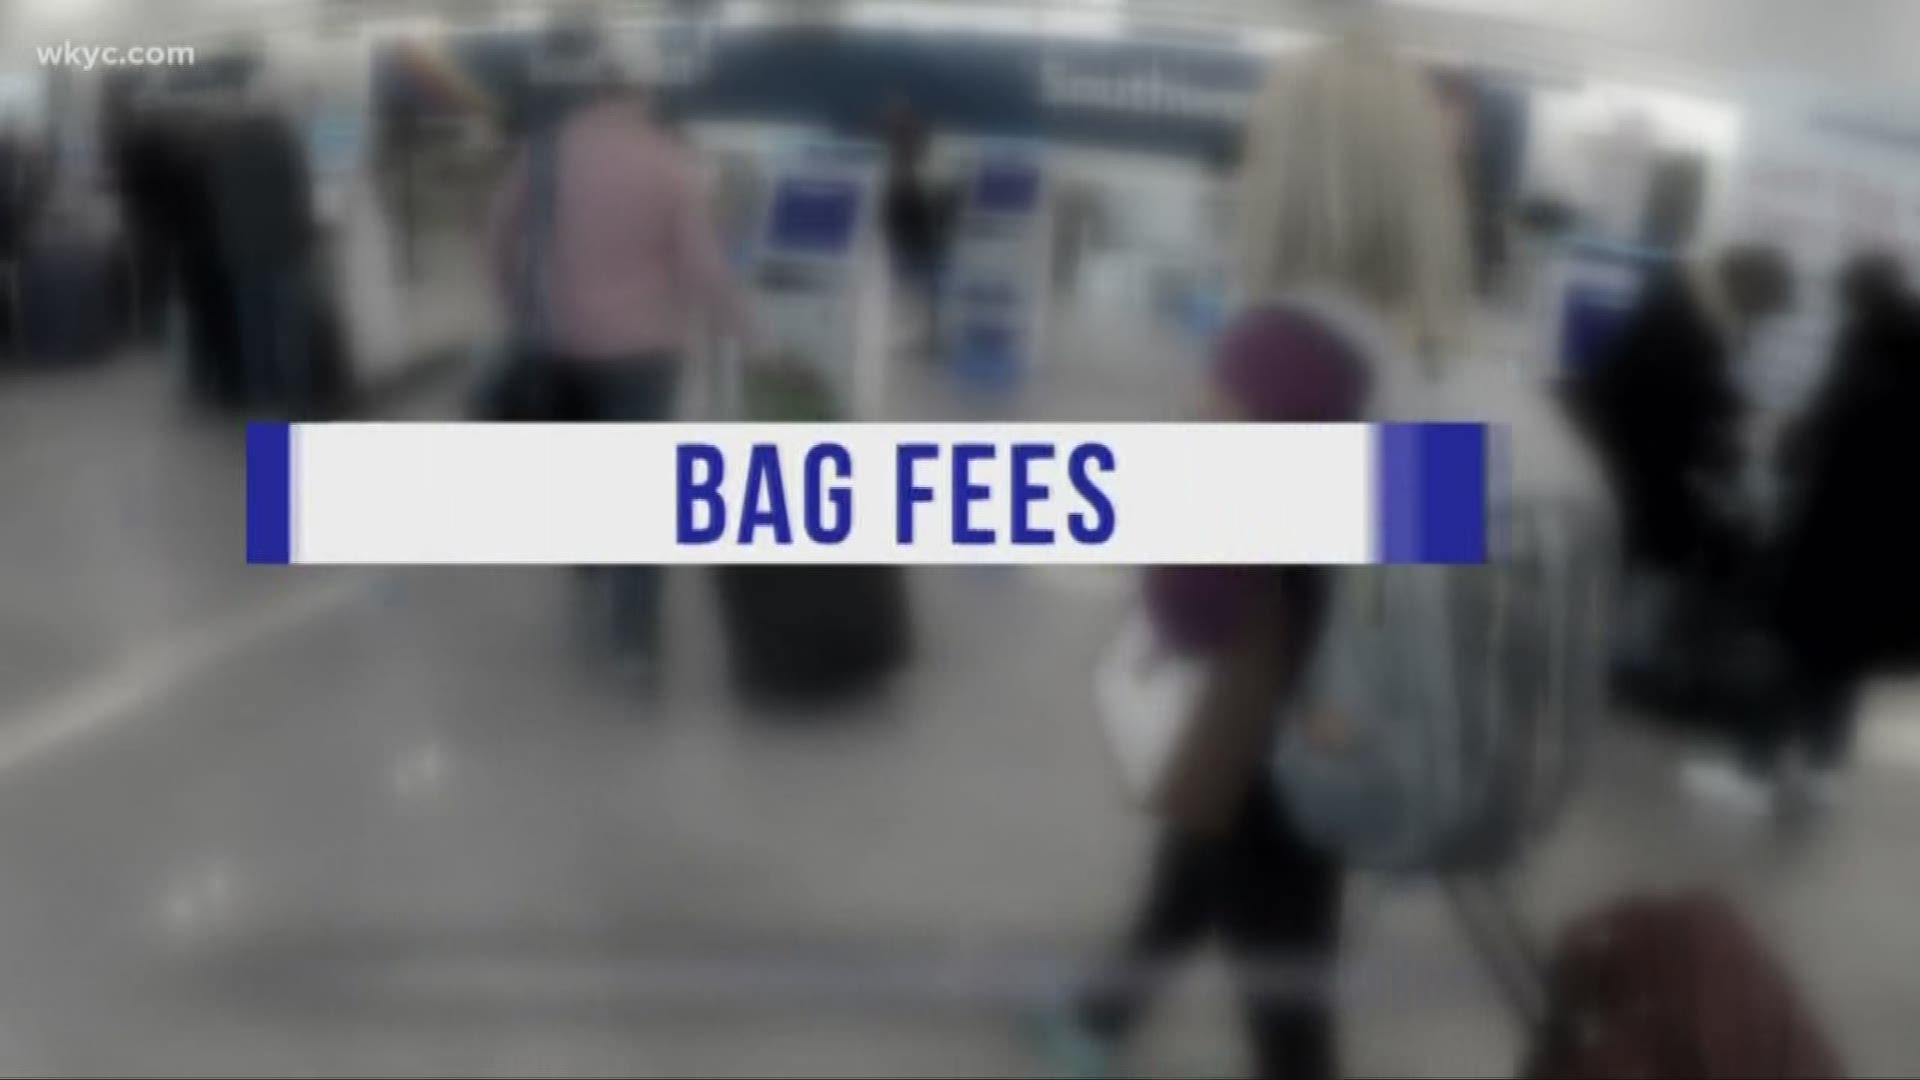 Are you being overcharged for you bags?